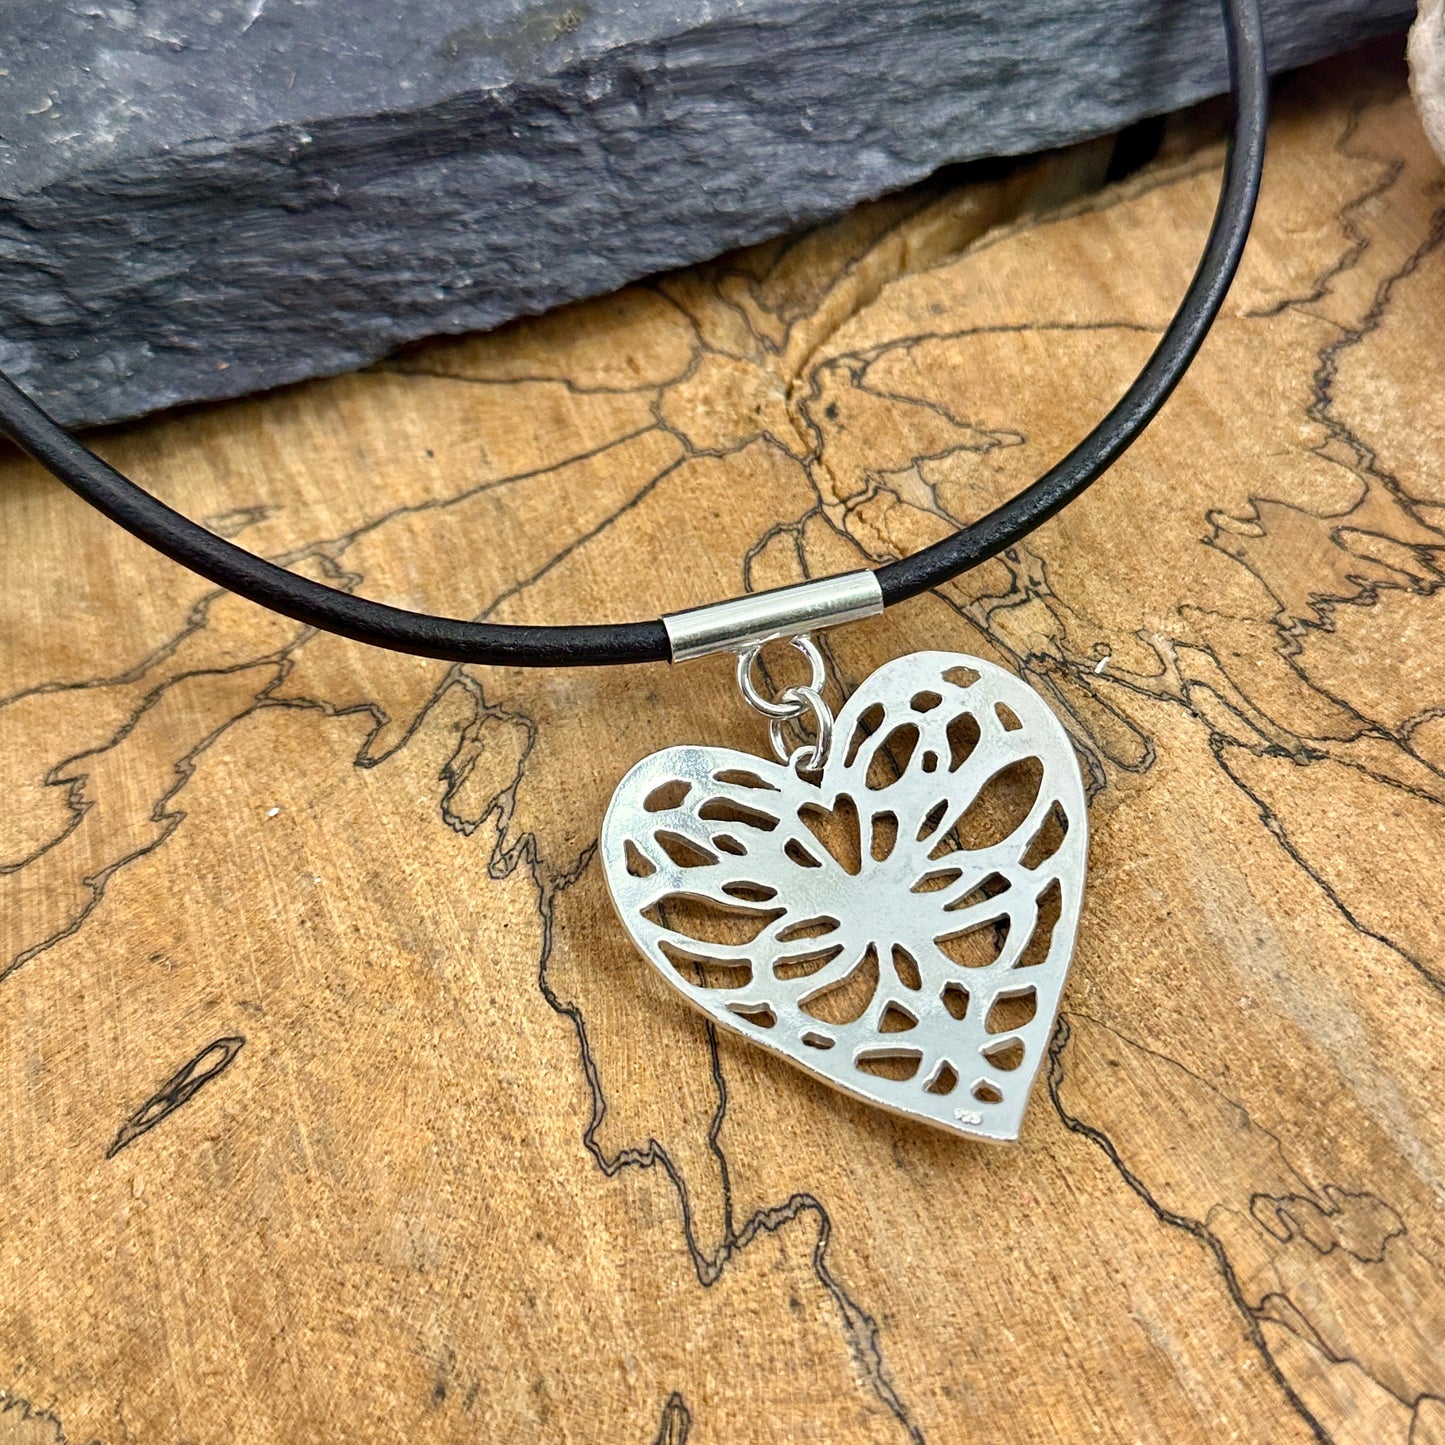 Handmade one of a kind sterling silver necklace